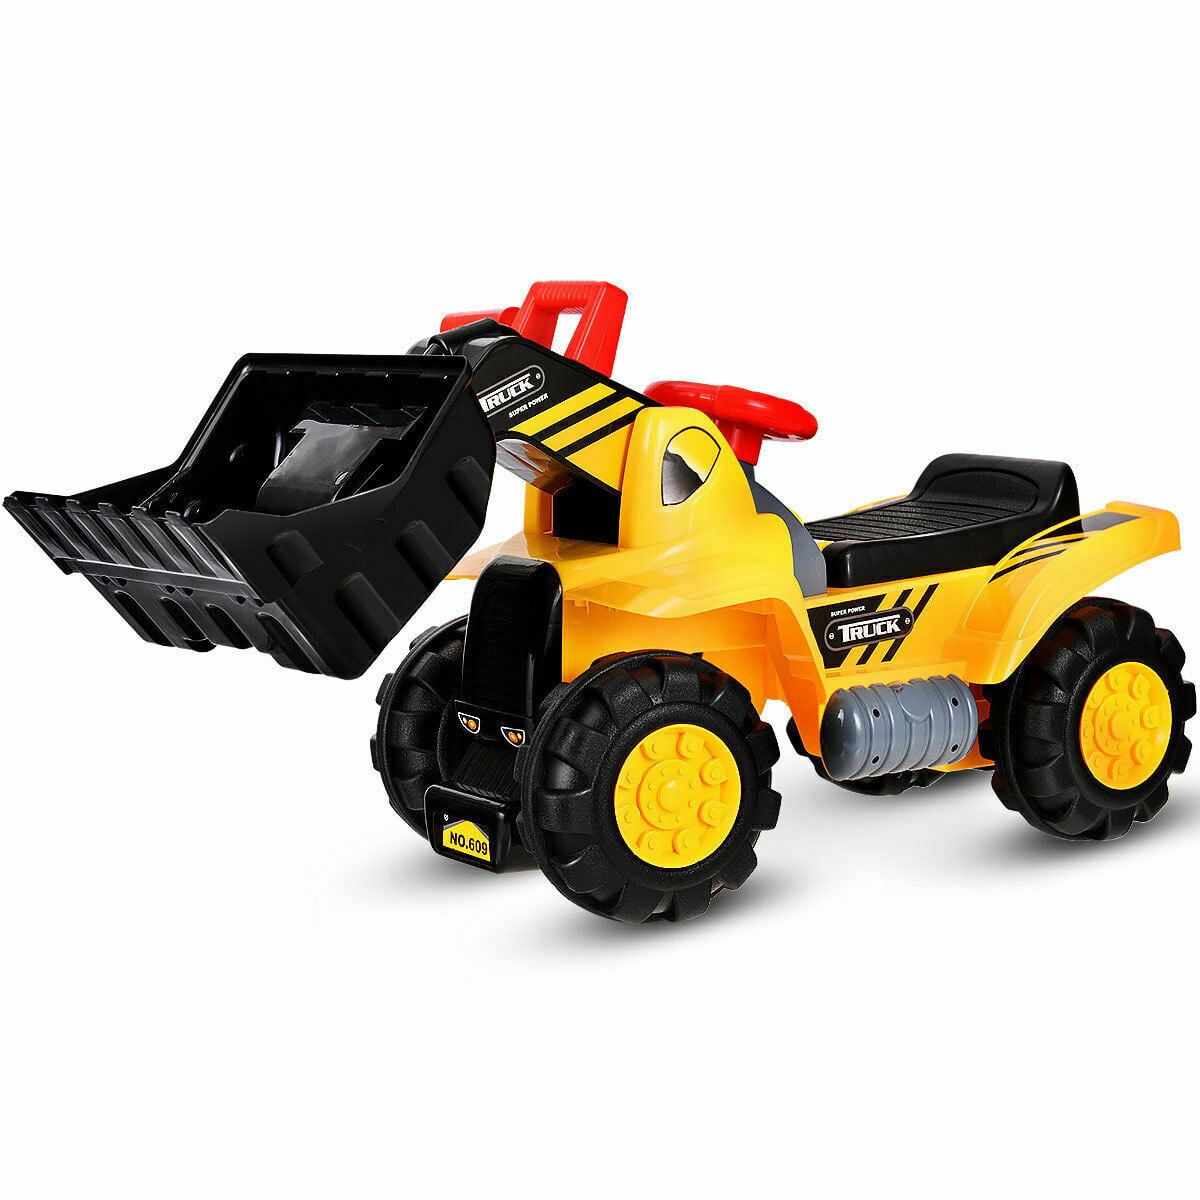 Ride-on Push Along Kubota Tractor With Trailer and Garden Tools 260c for sale online 